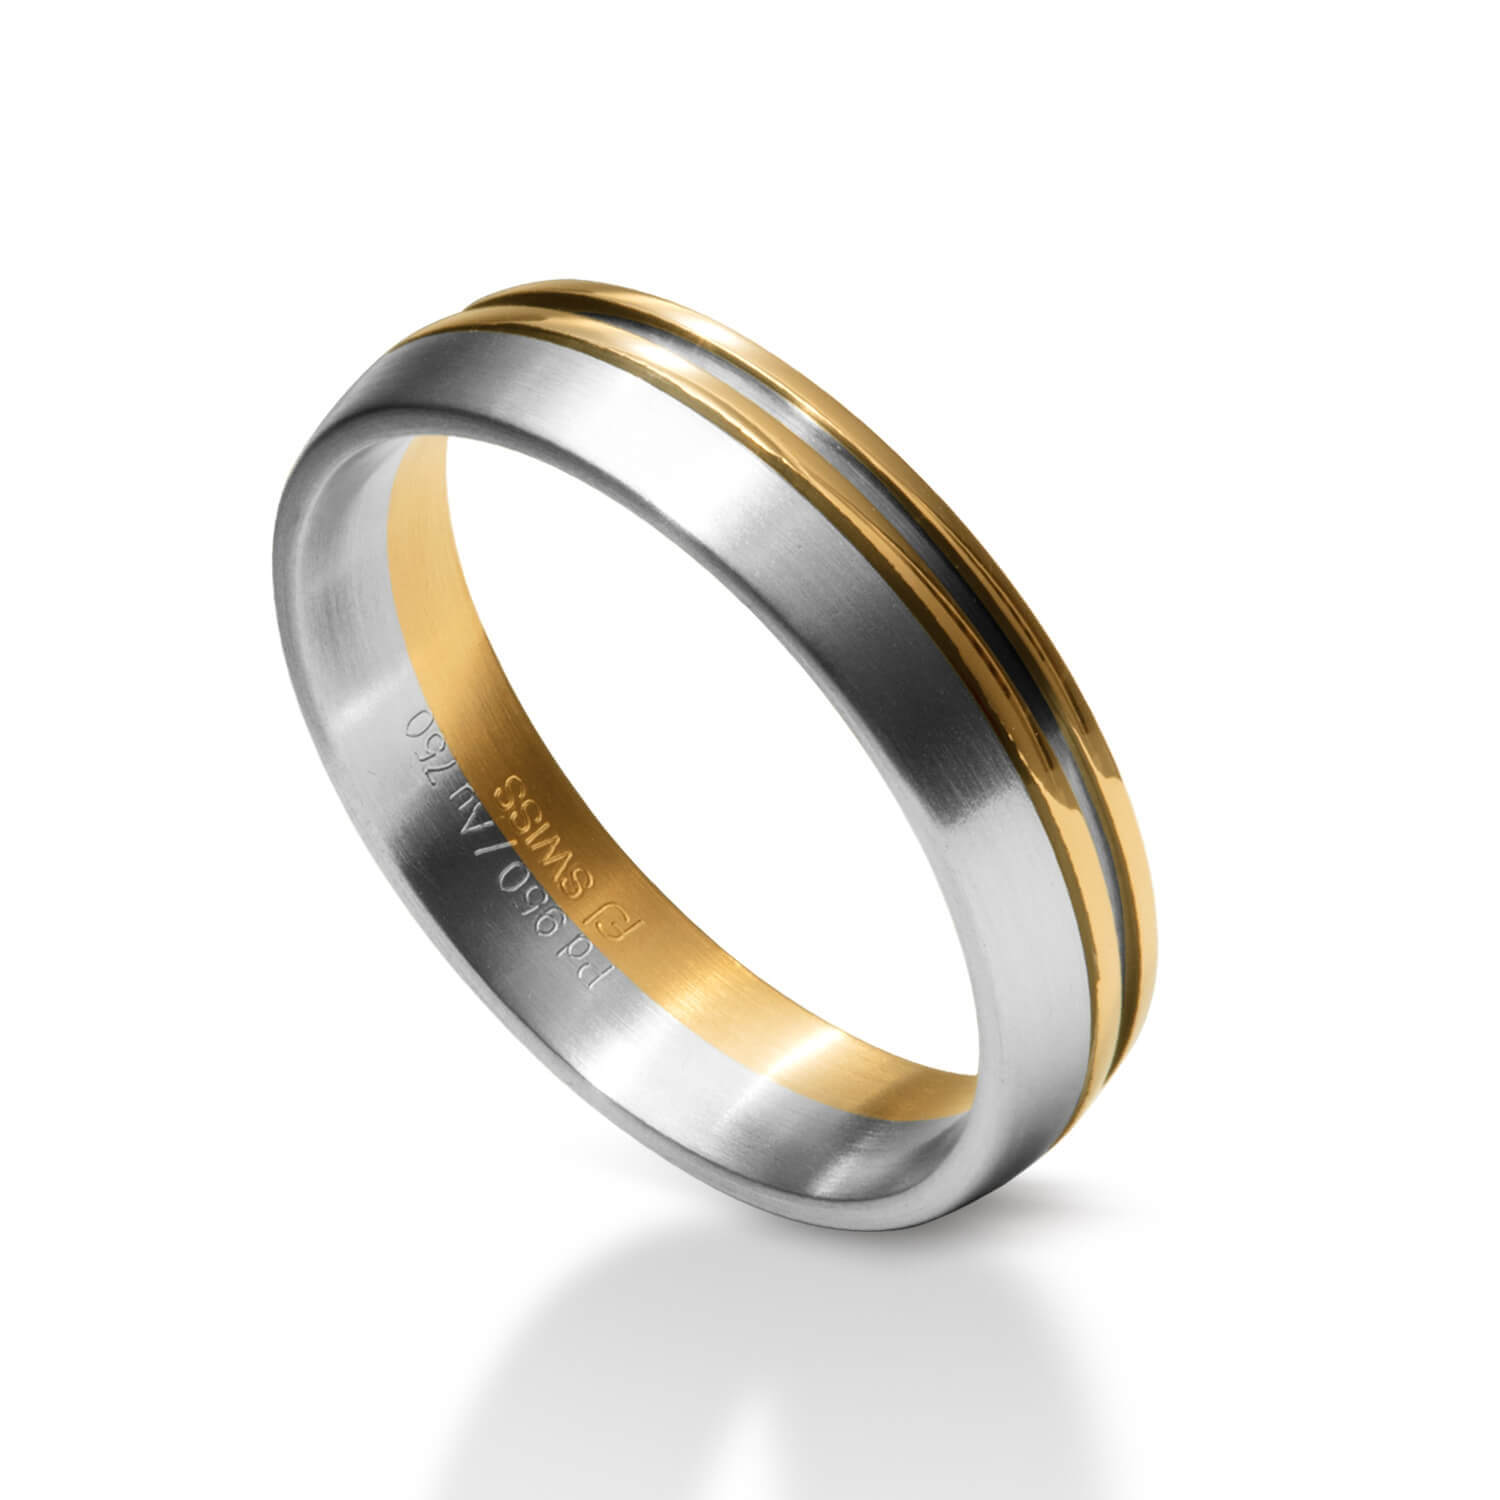 wedding rings, wedding bands, rings, jewellery, jewelry, gold, platinum, carbon